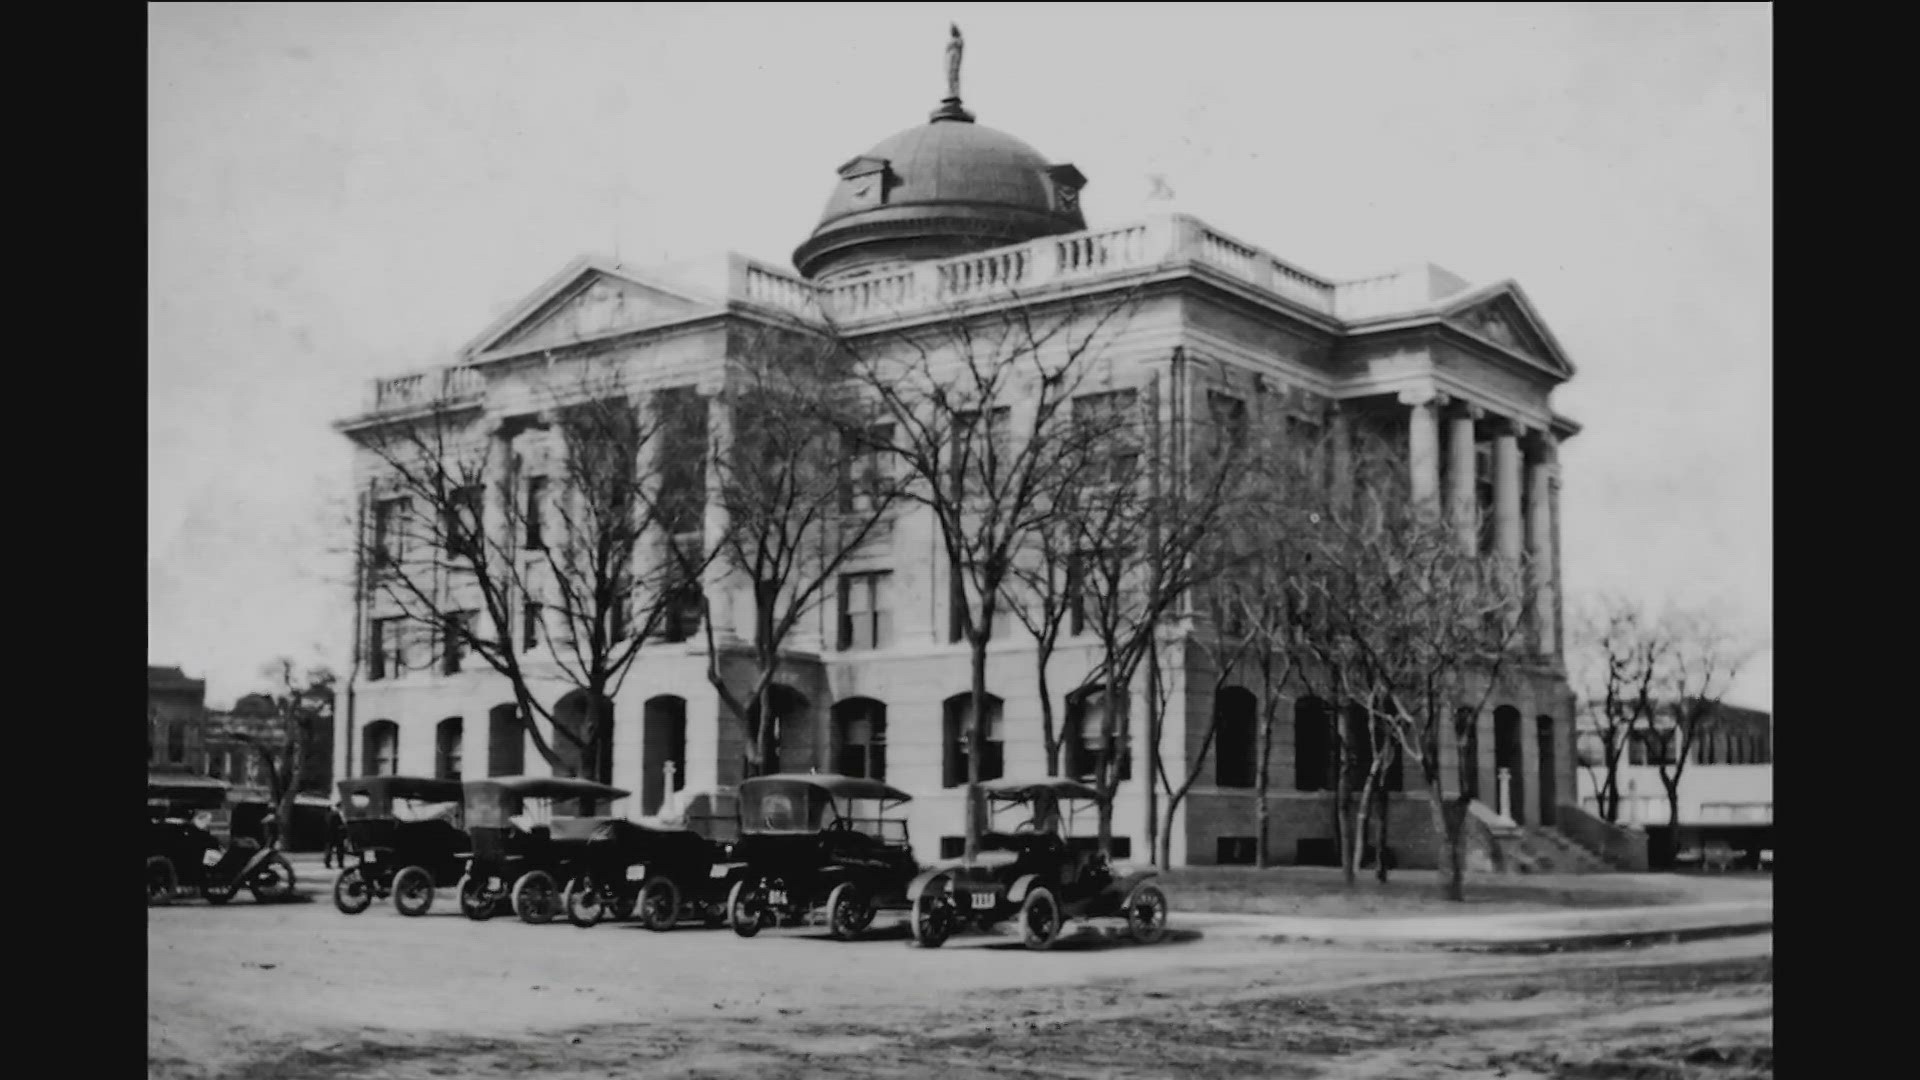 As Williamson County celebrates its 175th anniversary, KVUE looks back to the past of what happened in the county over the last 175 years.